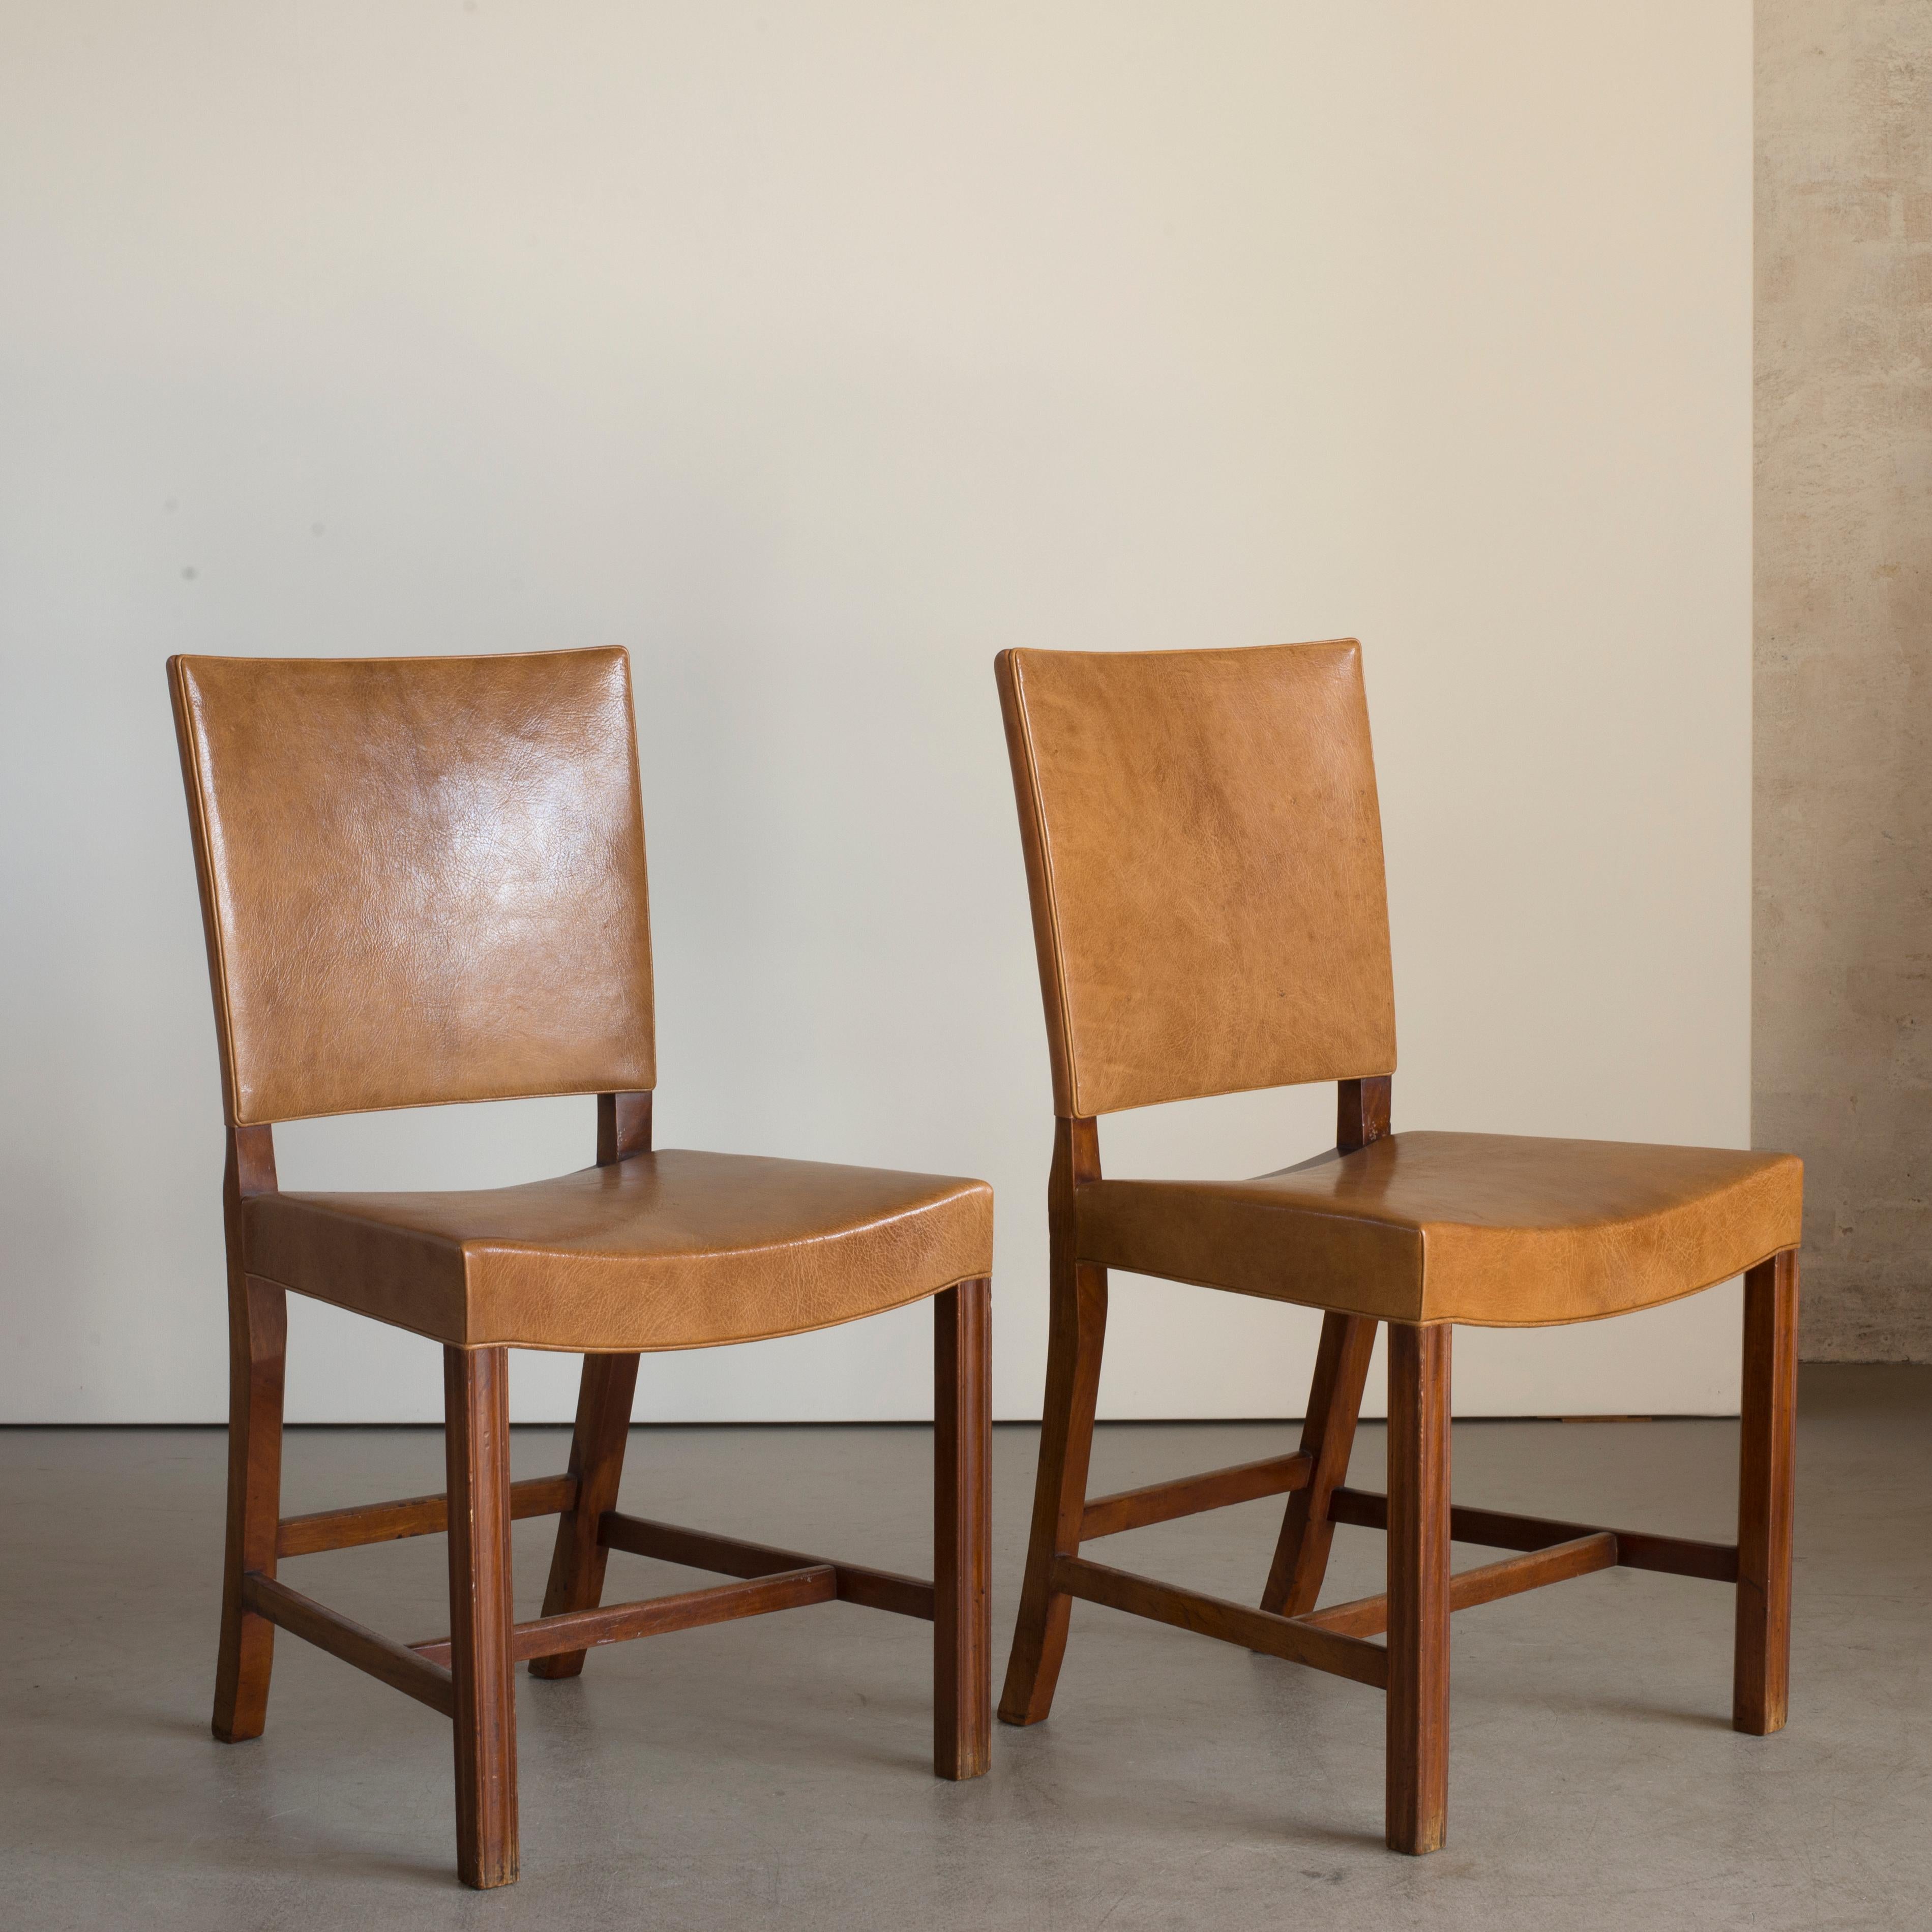 Mid-20th Century Kaare Klint Set of Six Red Chairs for Rud. Rasmussen